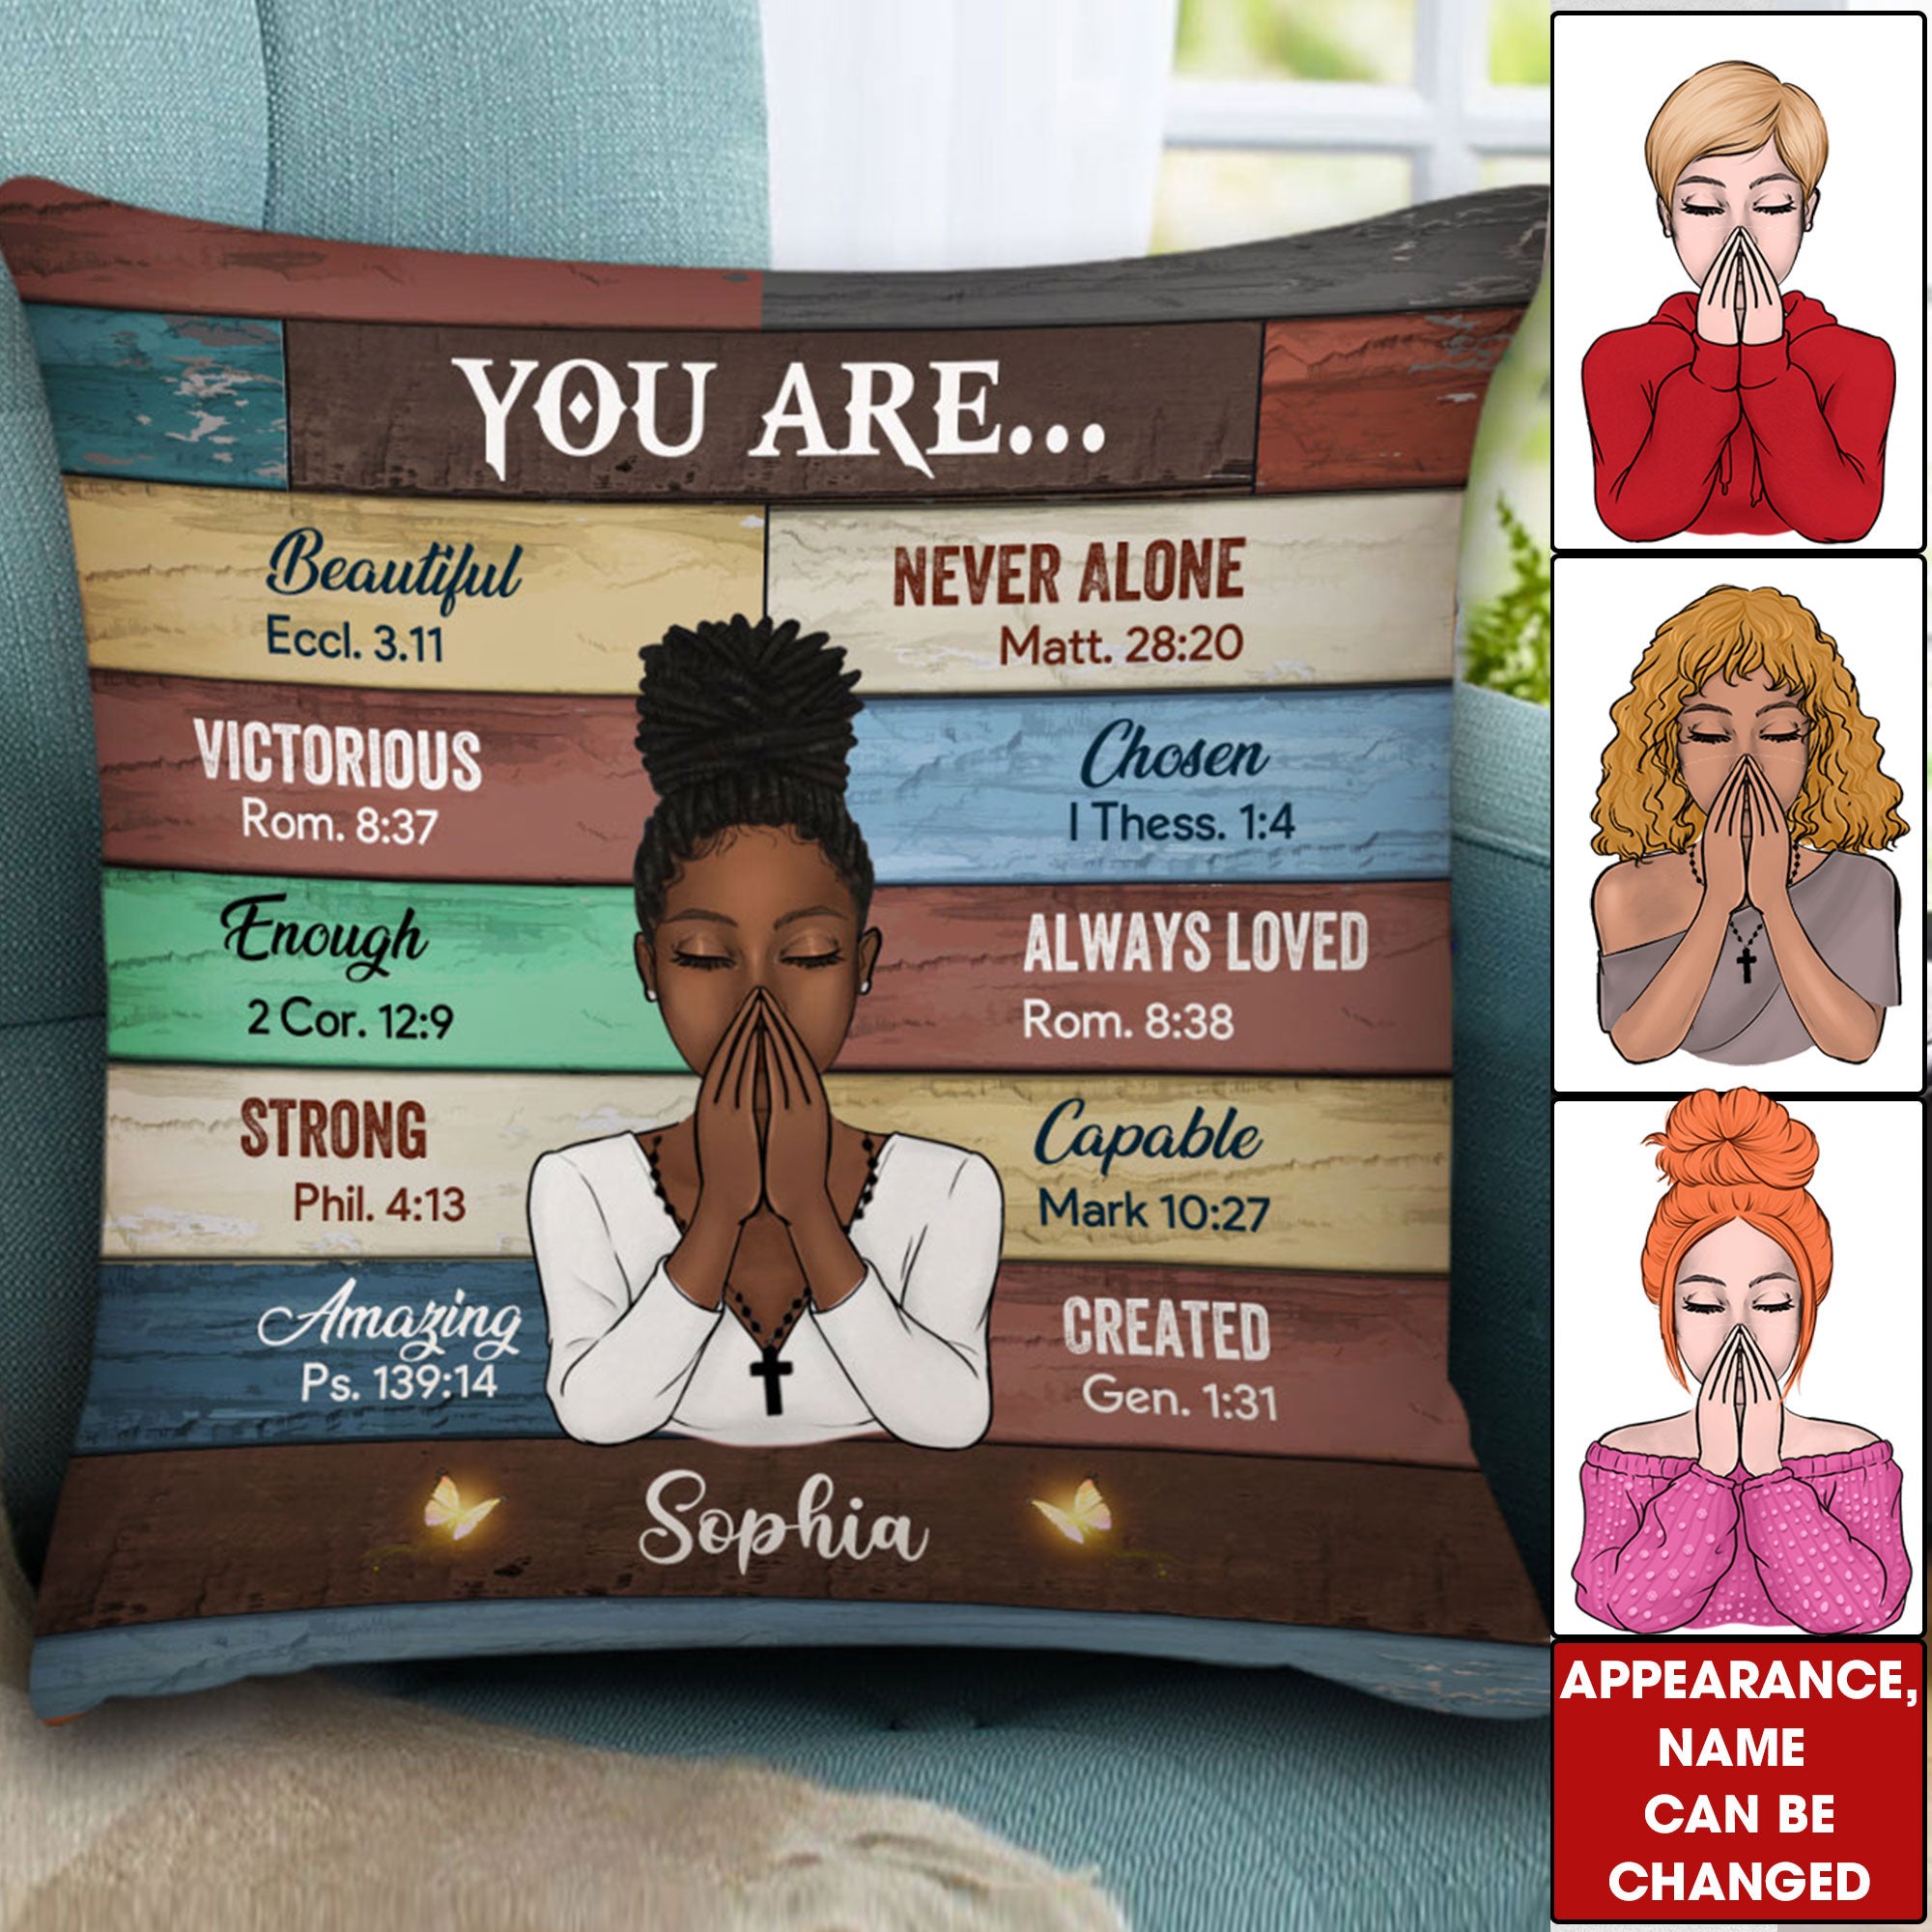 You Are Beautiful Victorious Enough Strong - Custom Appearances And Names - Personalized Pillow, Gift For Family